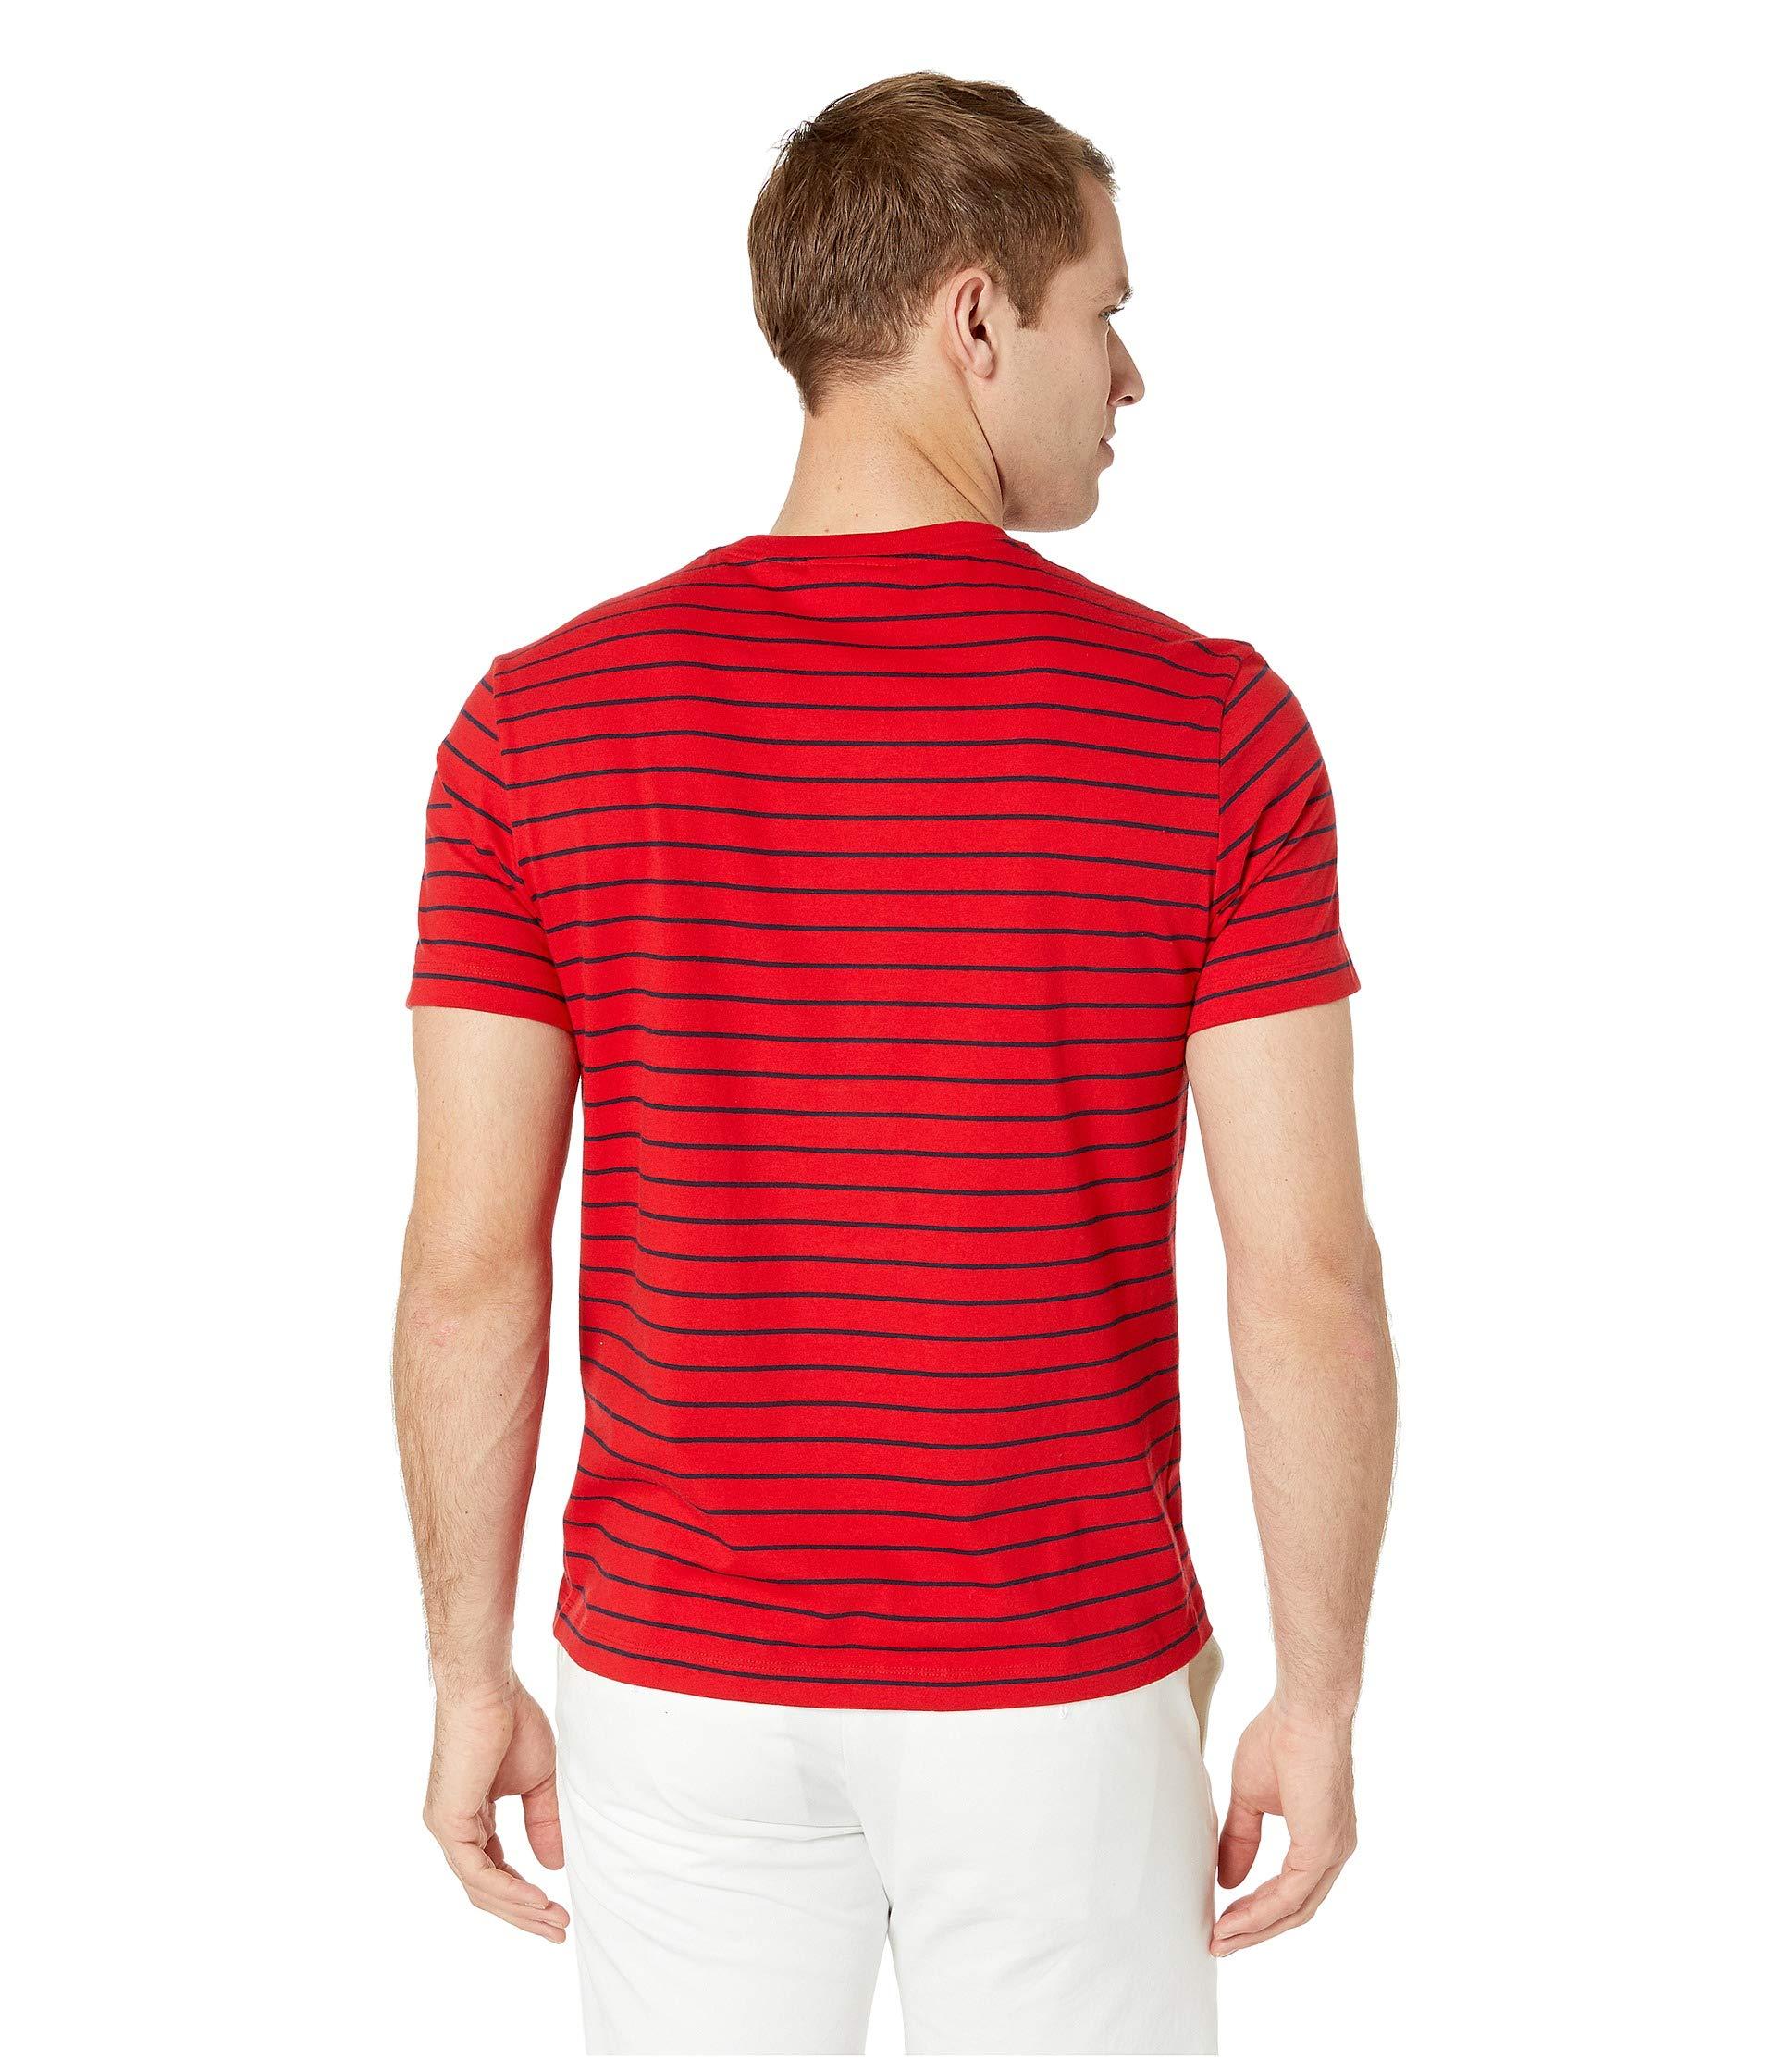 Lacoste Cotton Short Sleeve Jersey Striped Necktape in Red/Navy Blue ...